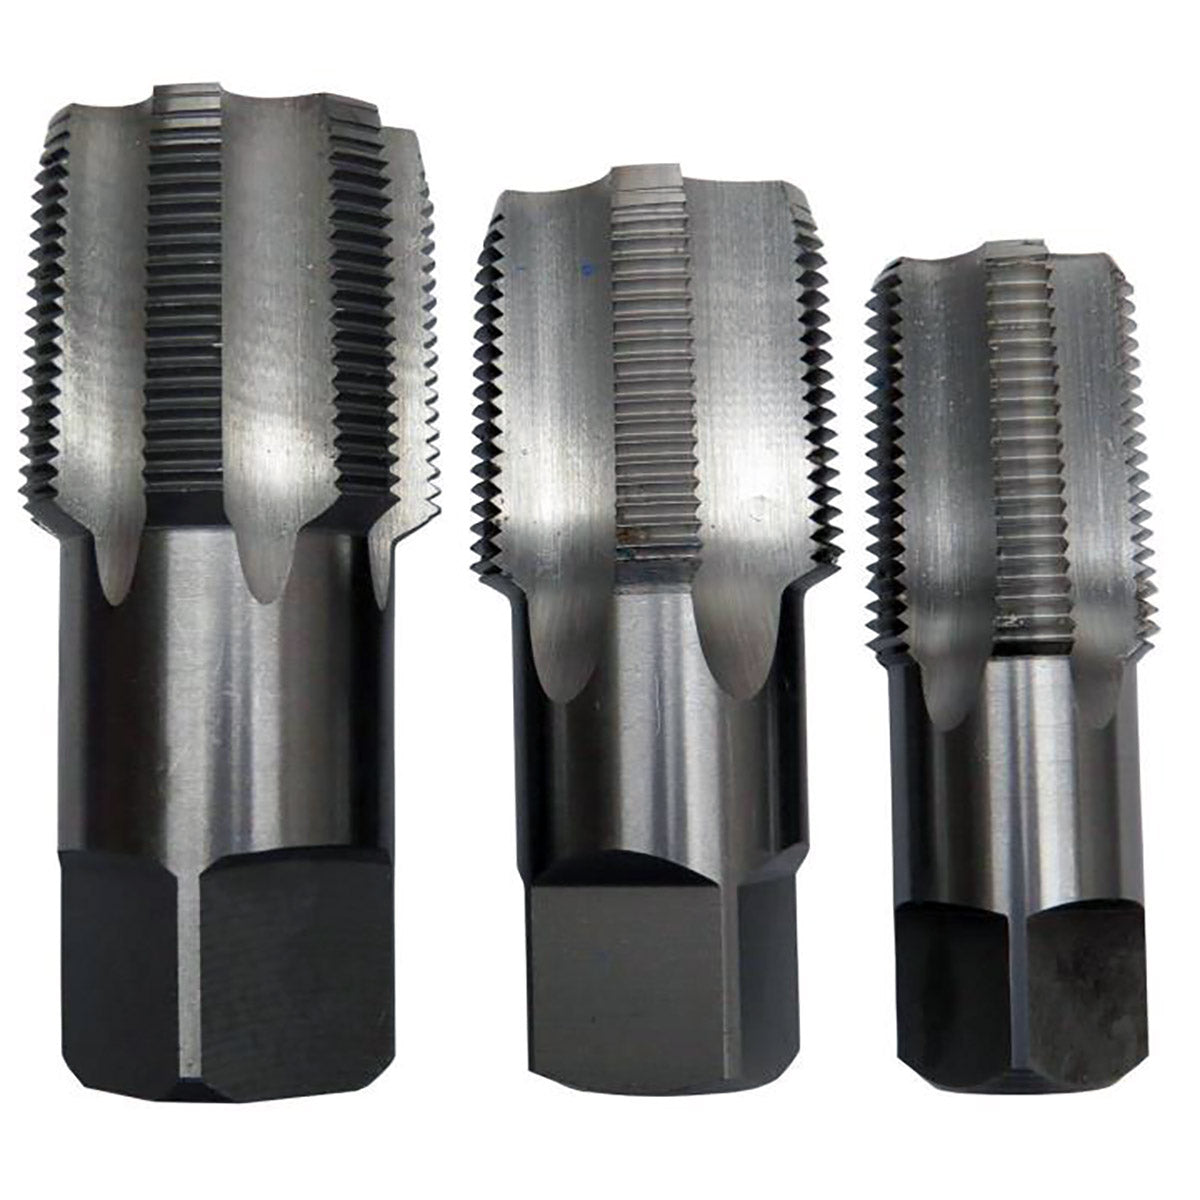 Drill America Carbon Steel Npt Pipe Tap Set In Carry Pouch 1" - 1-1/2" (3 Piece Set)